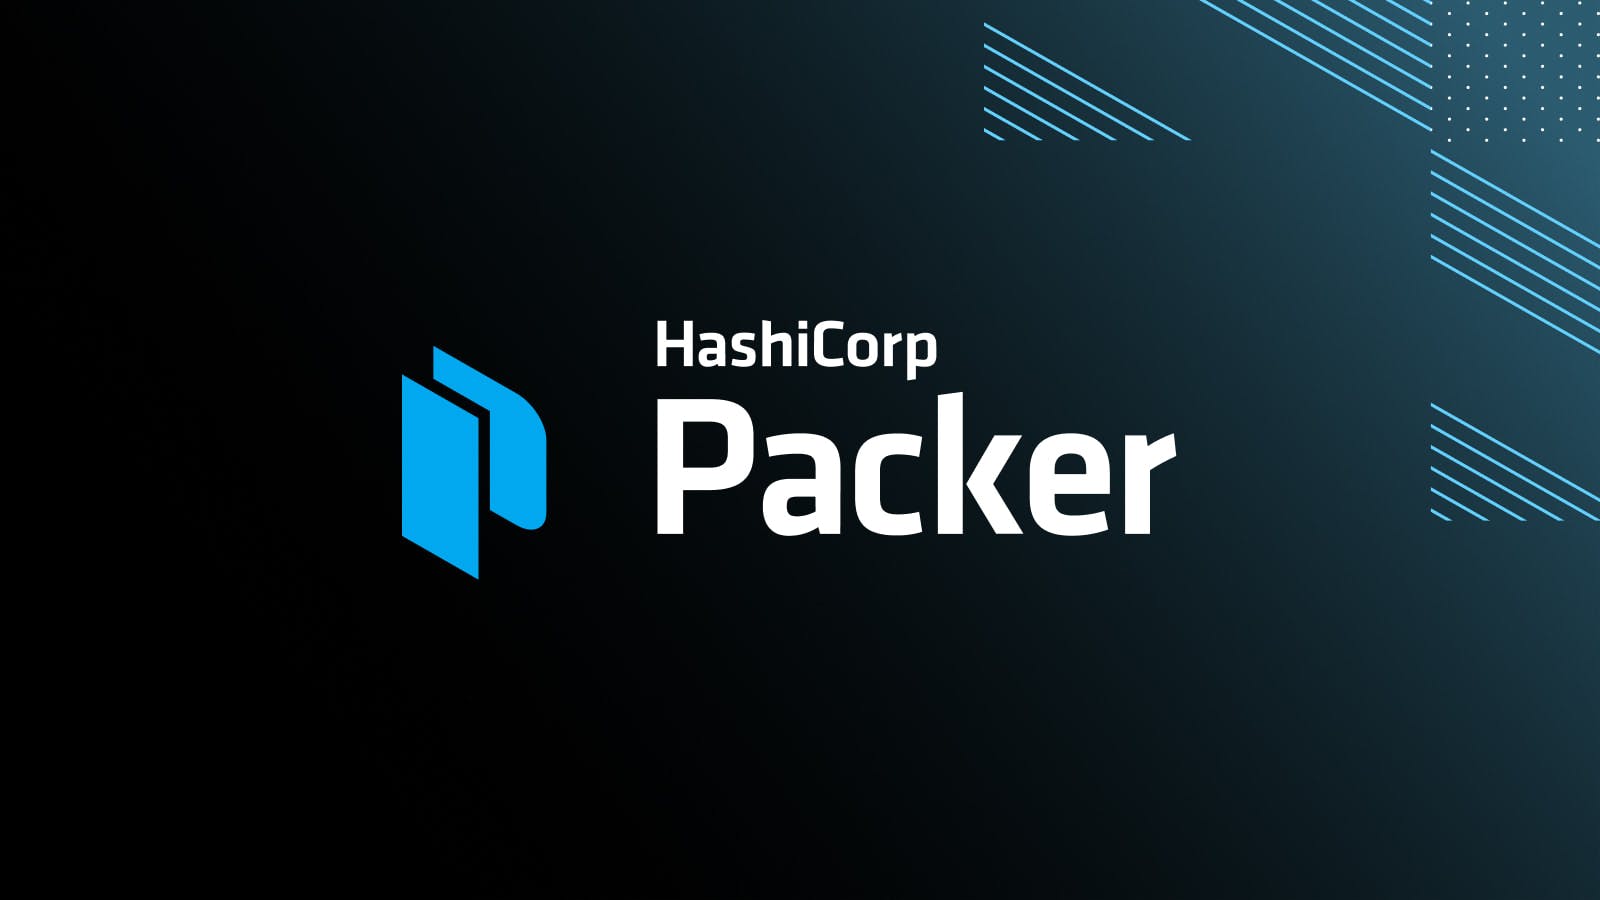 Announcing the HashiCorp Packer Plugin SDK